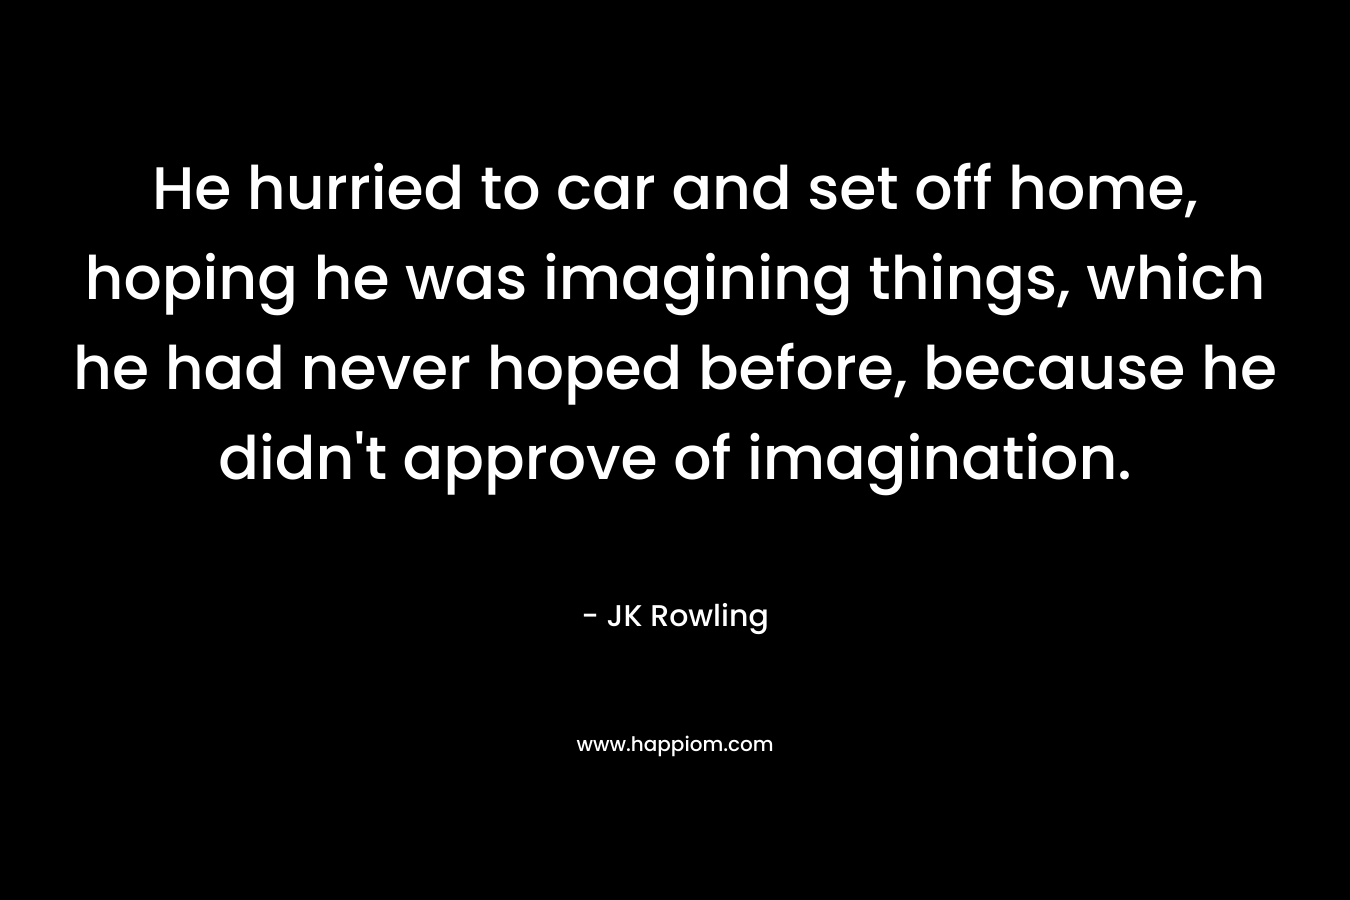 He hurried to car and set off home, hoping he was imagining things, which he had never hoped before, because he didn’t approve of imagination. – JK Rowling